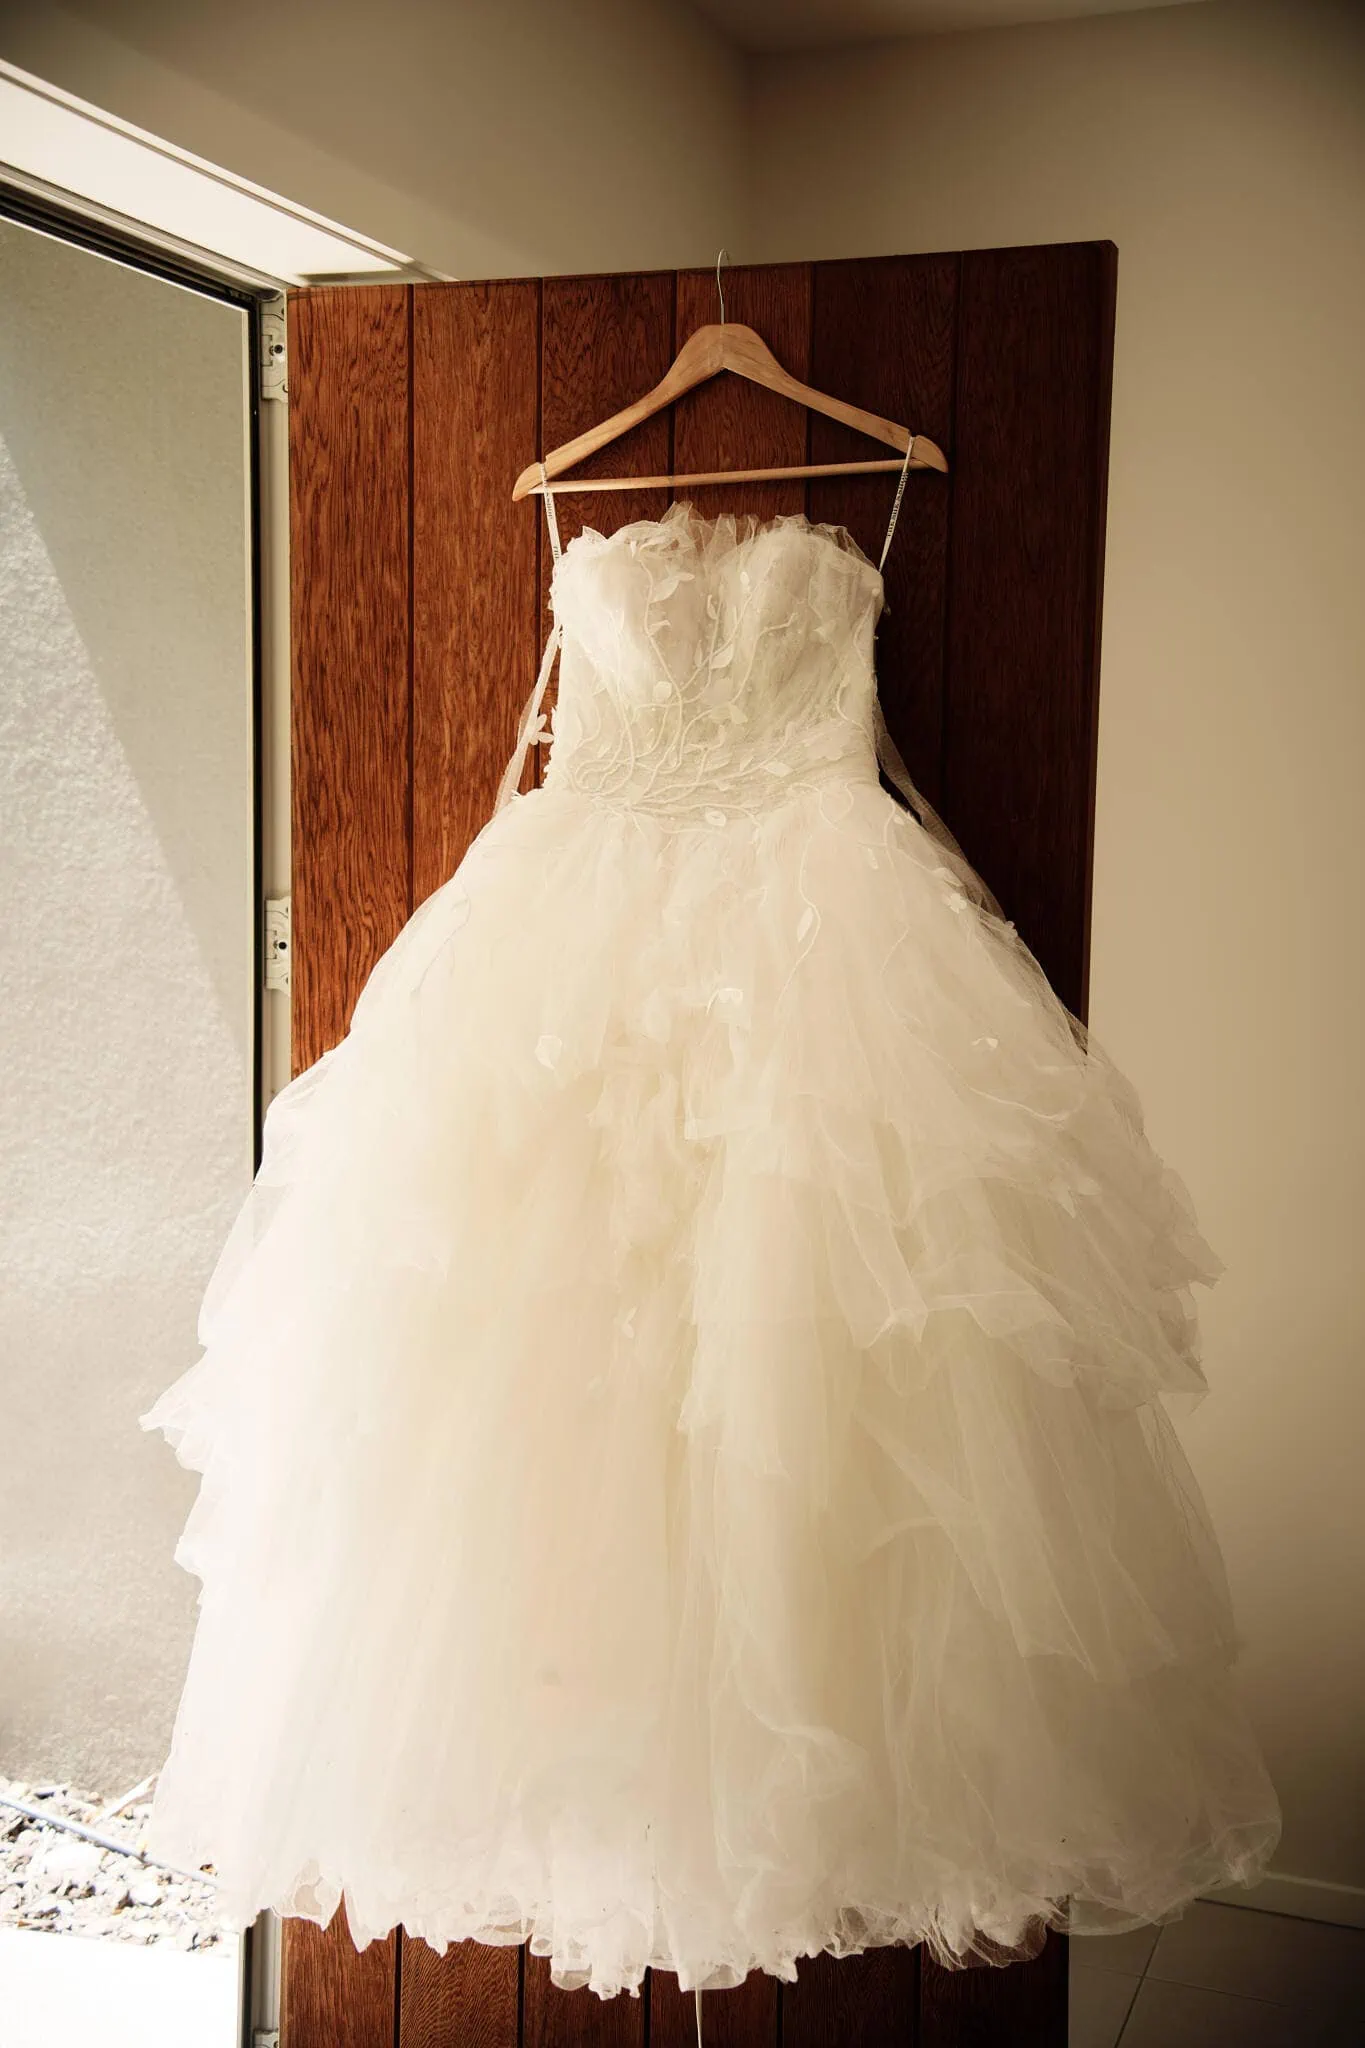 Carlos and Wanzhu's intimate wedding dress hanging on a wooden door.